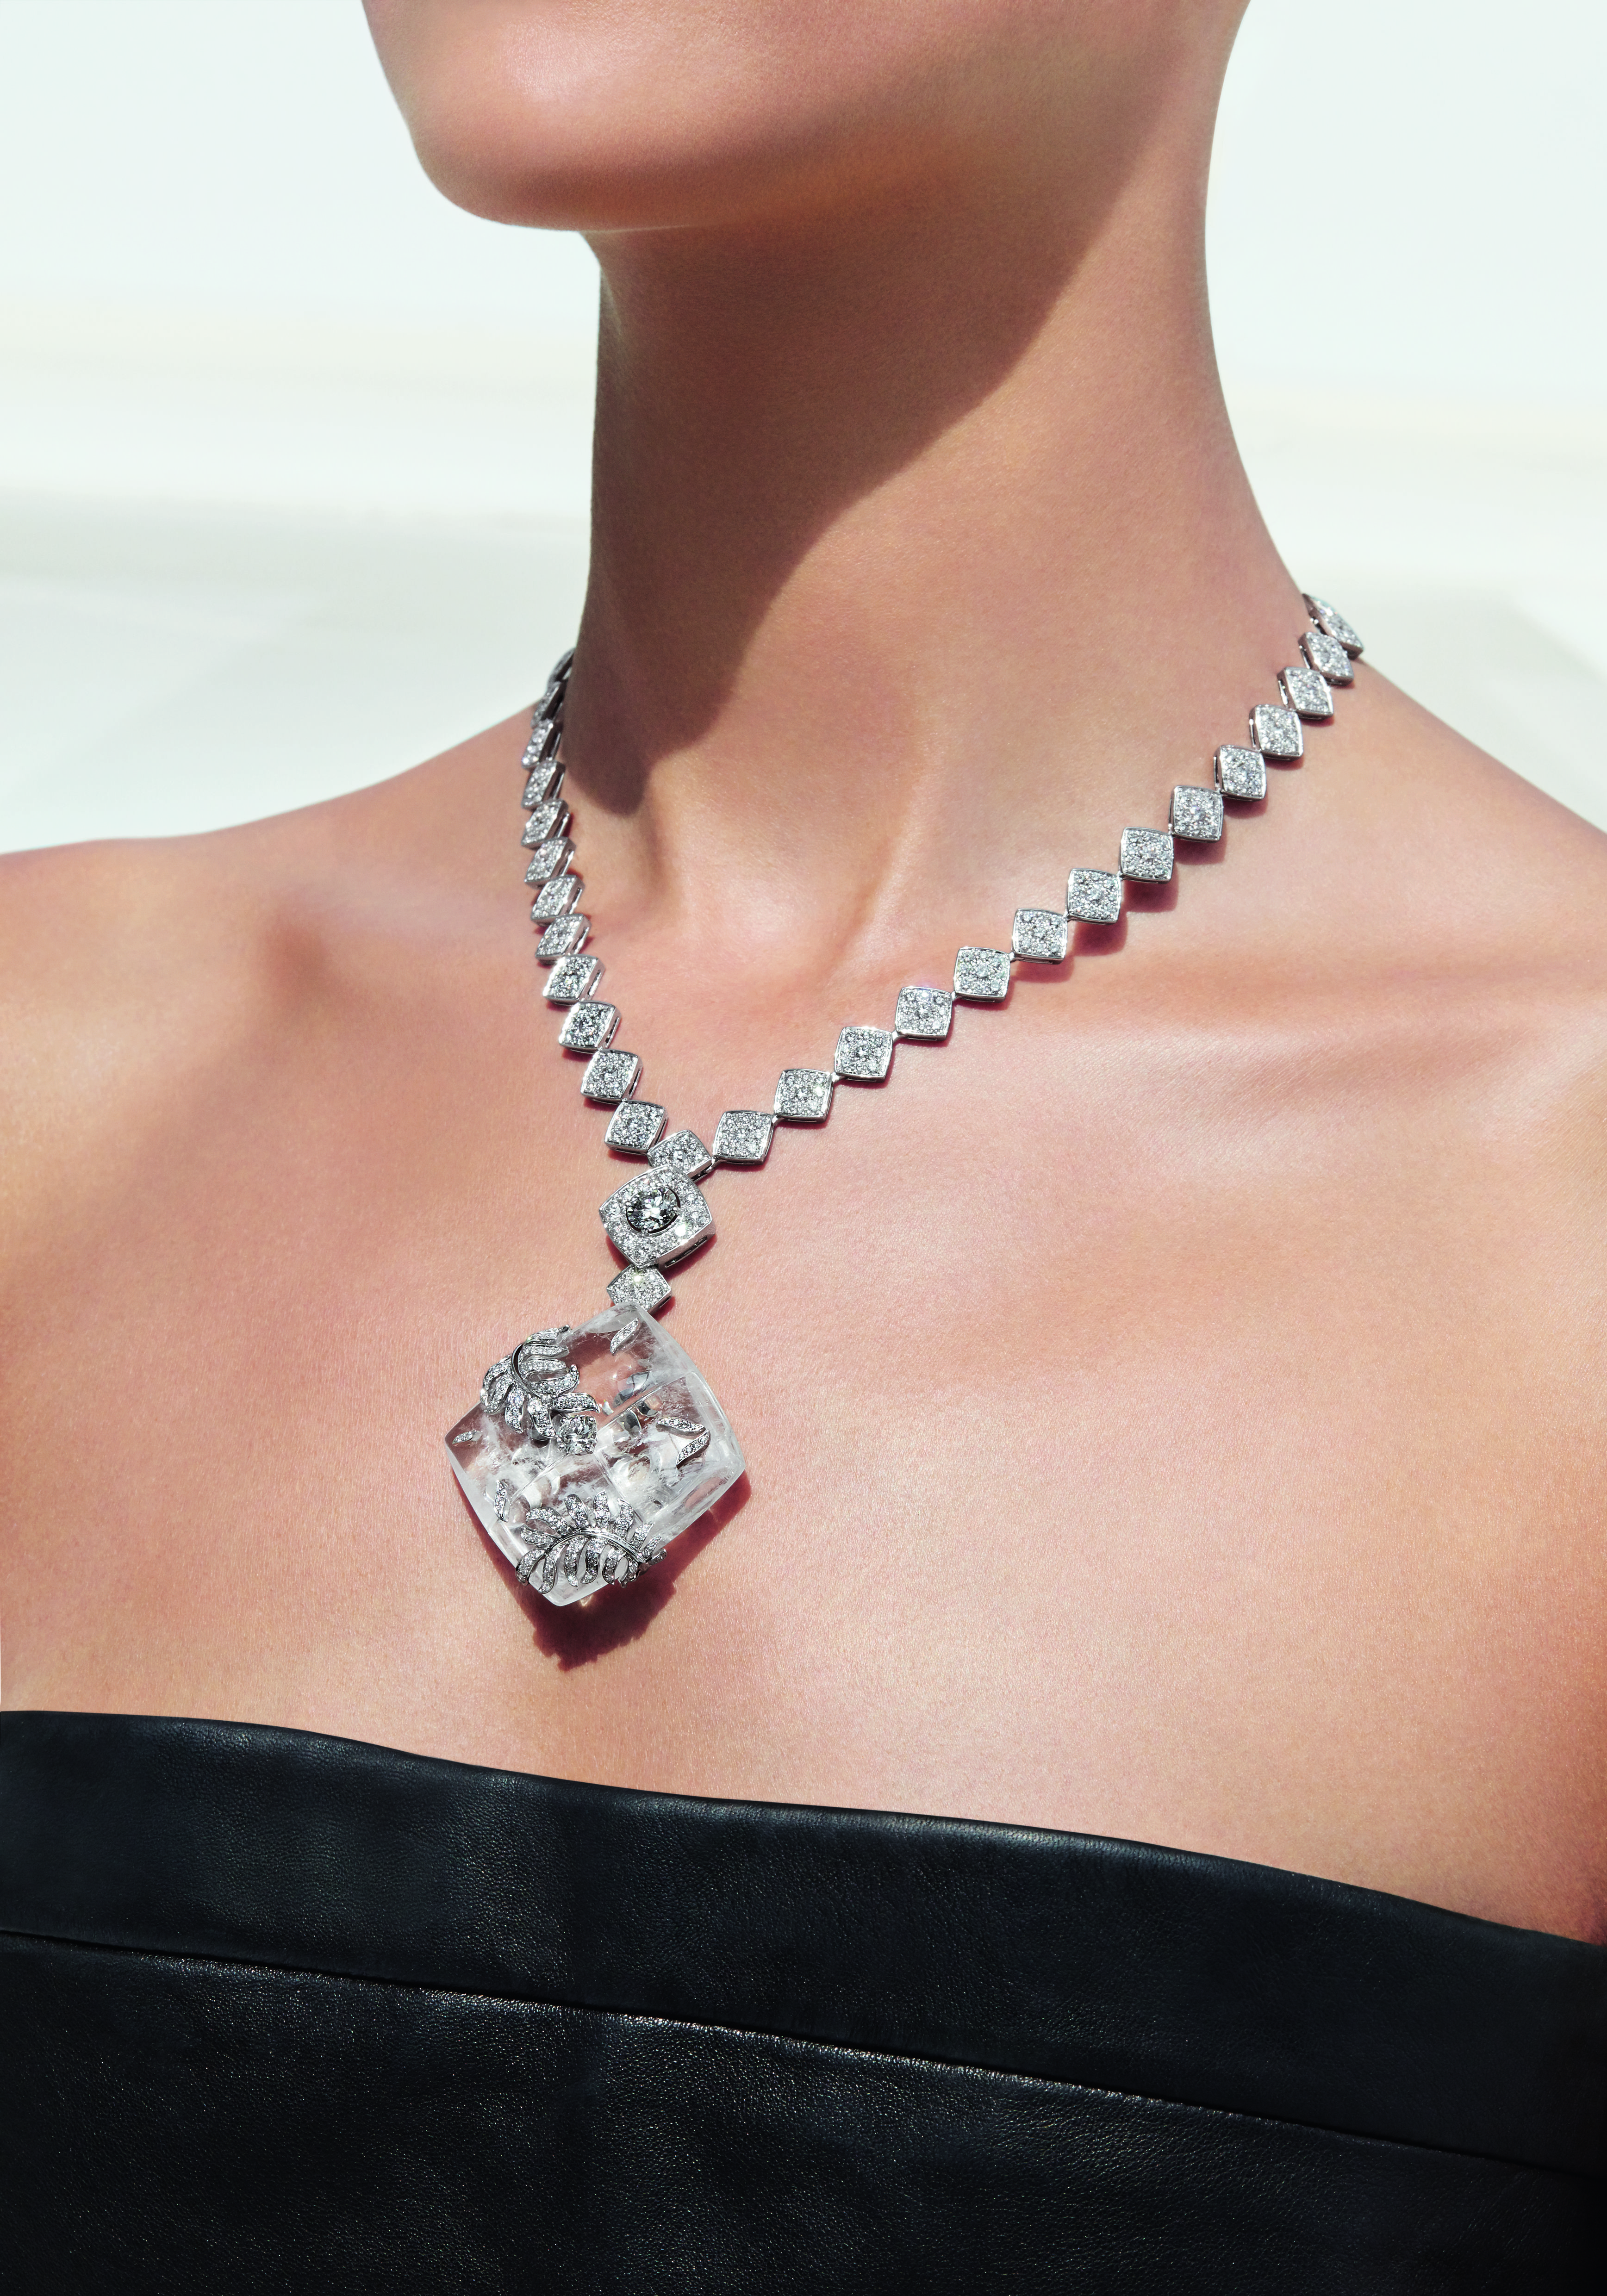 Carved in stone: Chanel's Collection N°5 High Jewellery — Hashtag